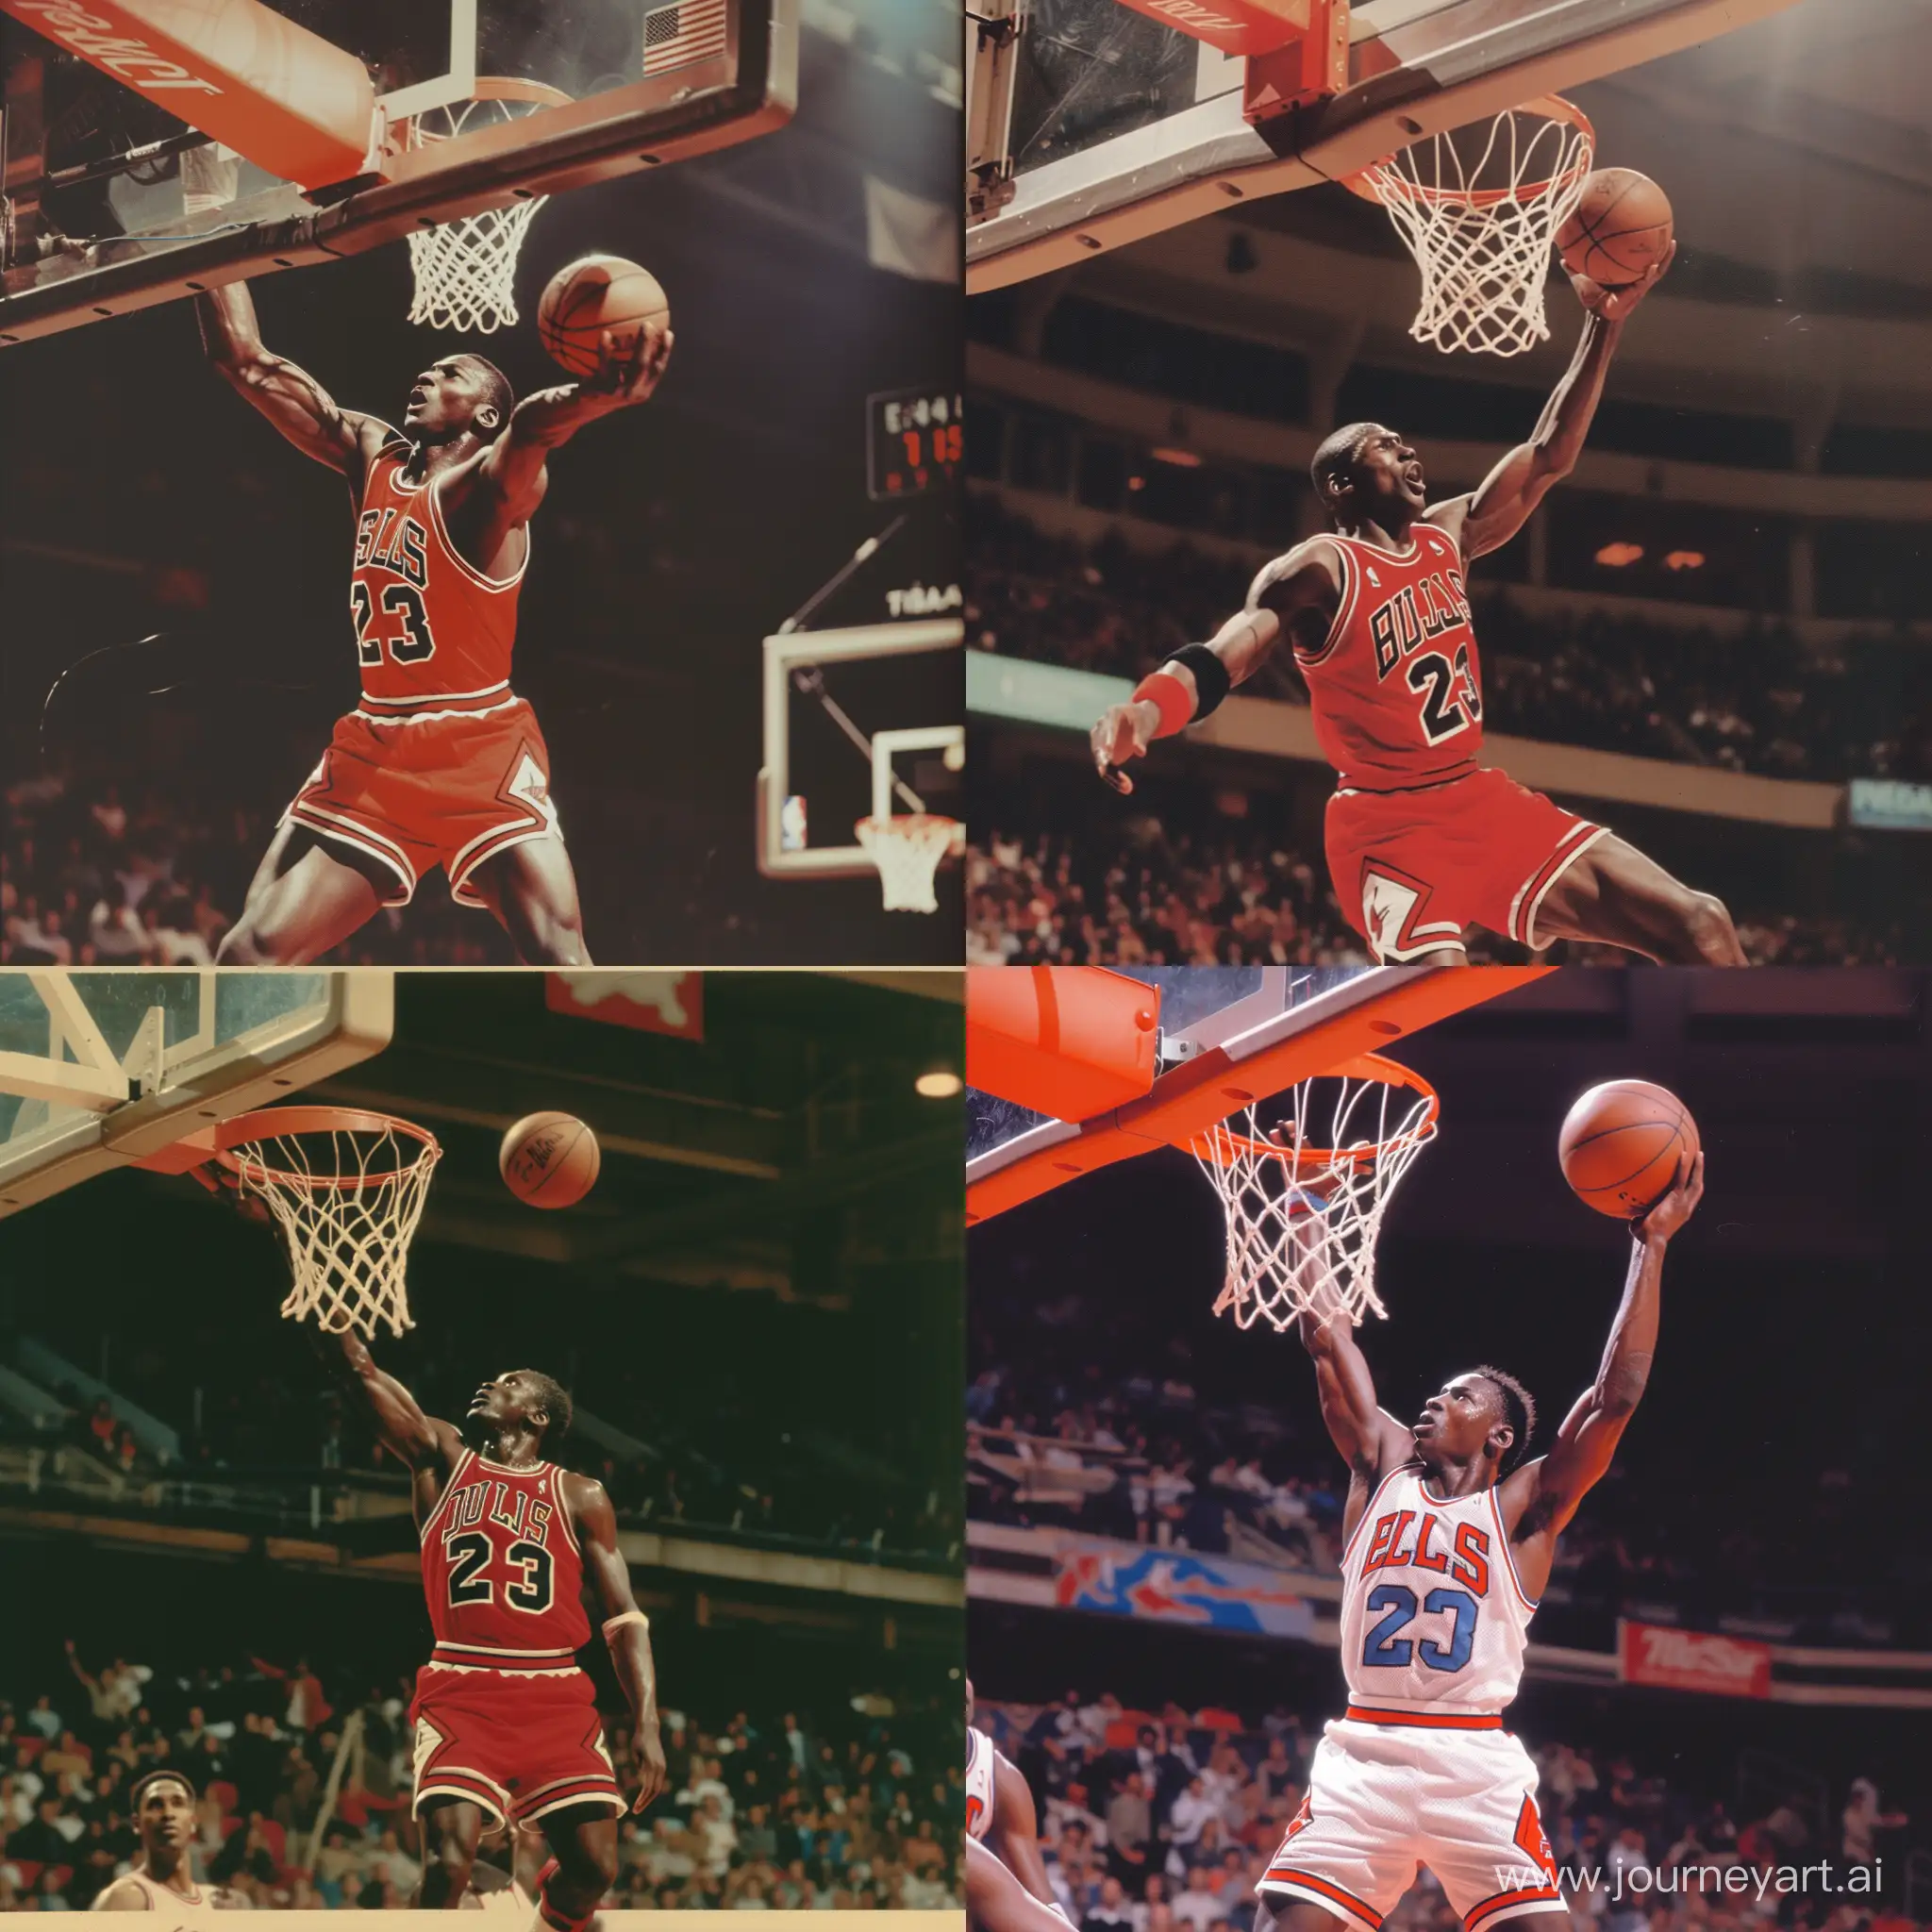 Michael-Jordans-Iconic-1980s-Dunk-Basketball-Legend-Soaring-to-Victory